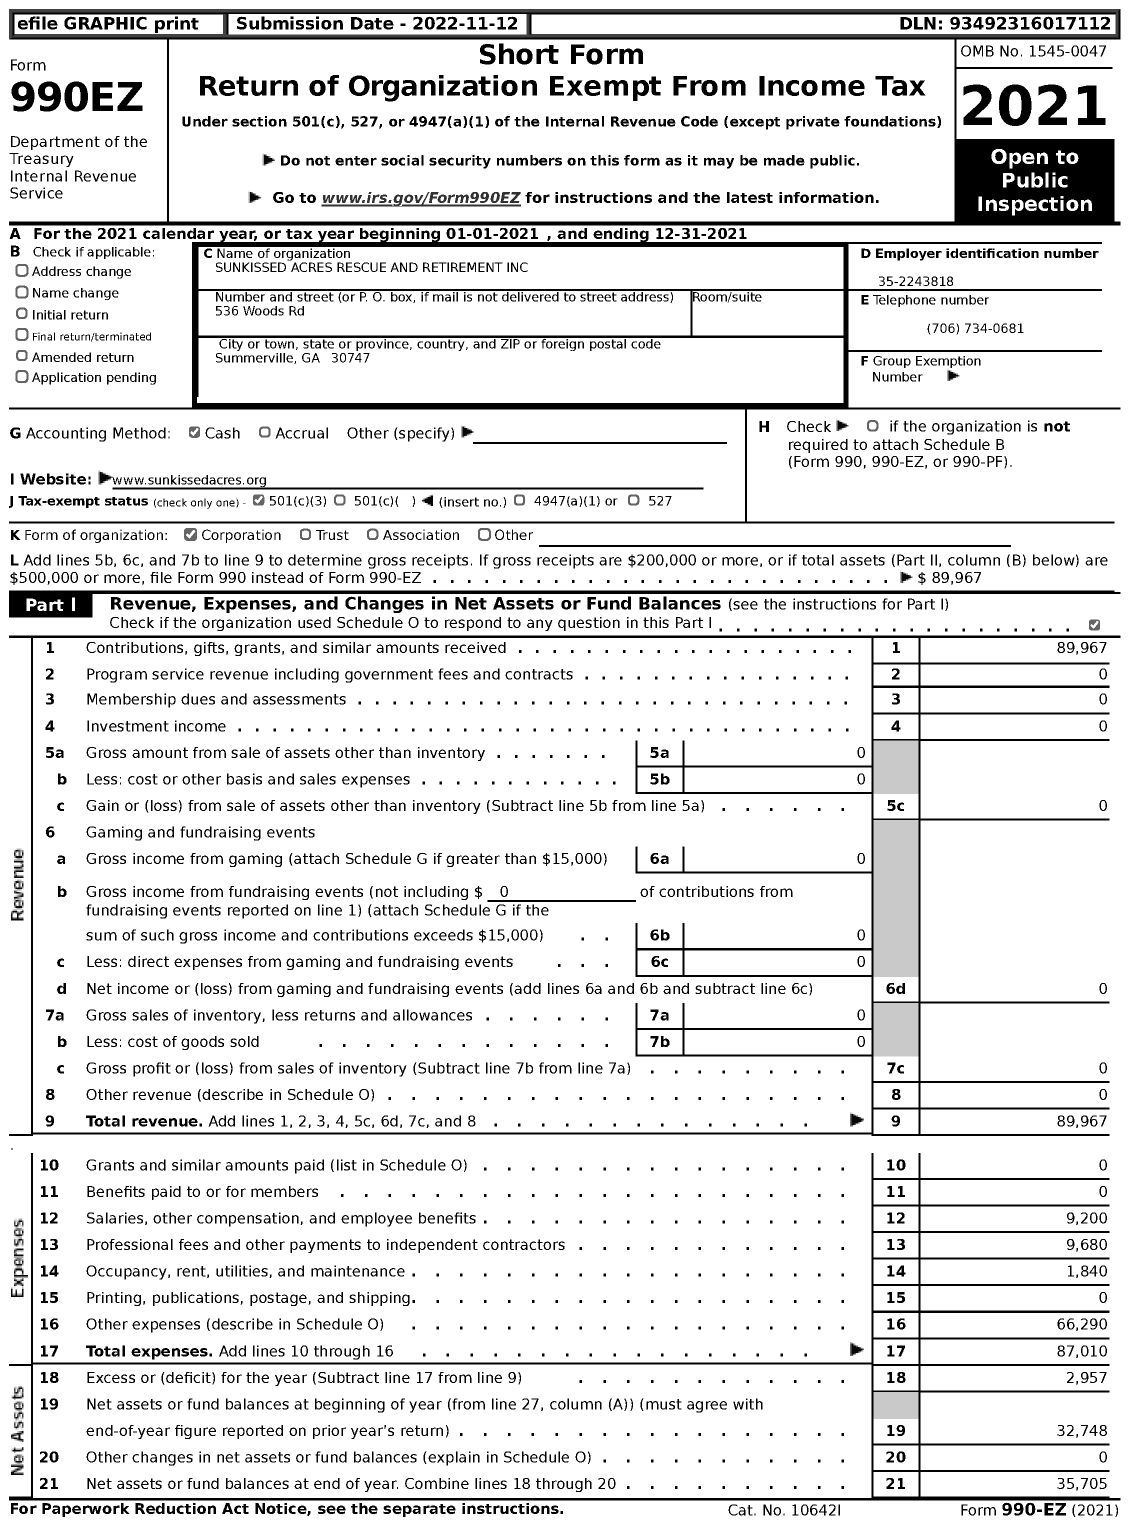 Image of first page of 2021 Form 990EZ for Sunkissed Acres Rescue and Retirement